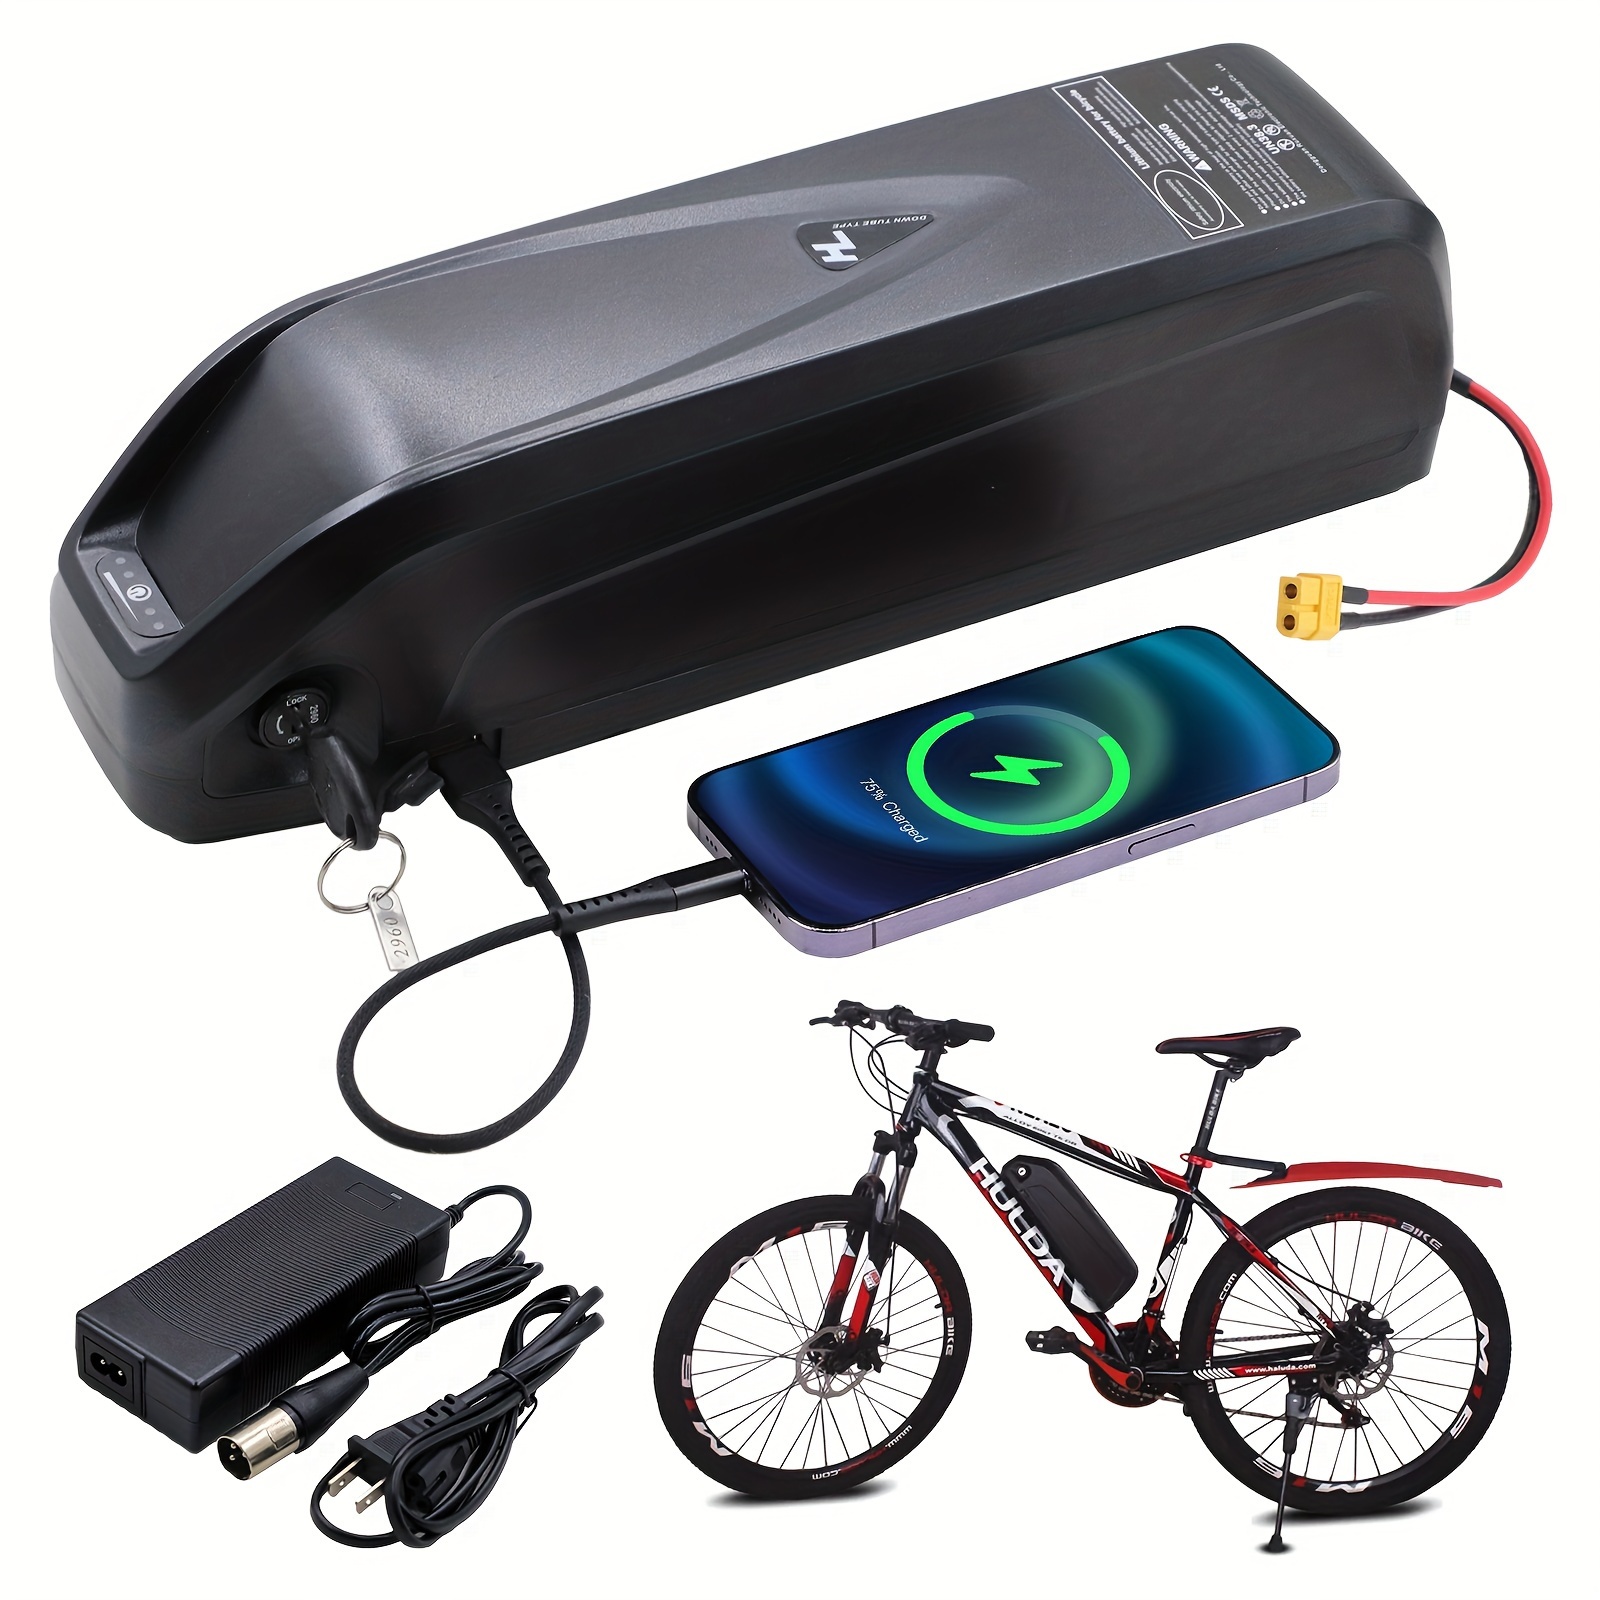 

Ebike Battery, Mountain Bike Road Bike Lithium Li-ion Battery Pack, 18650 Cells Pack, 52v 48v 36v Powerful Bicycle Lithium Battery With Charger, For 200w-1000w Motor